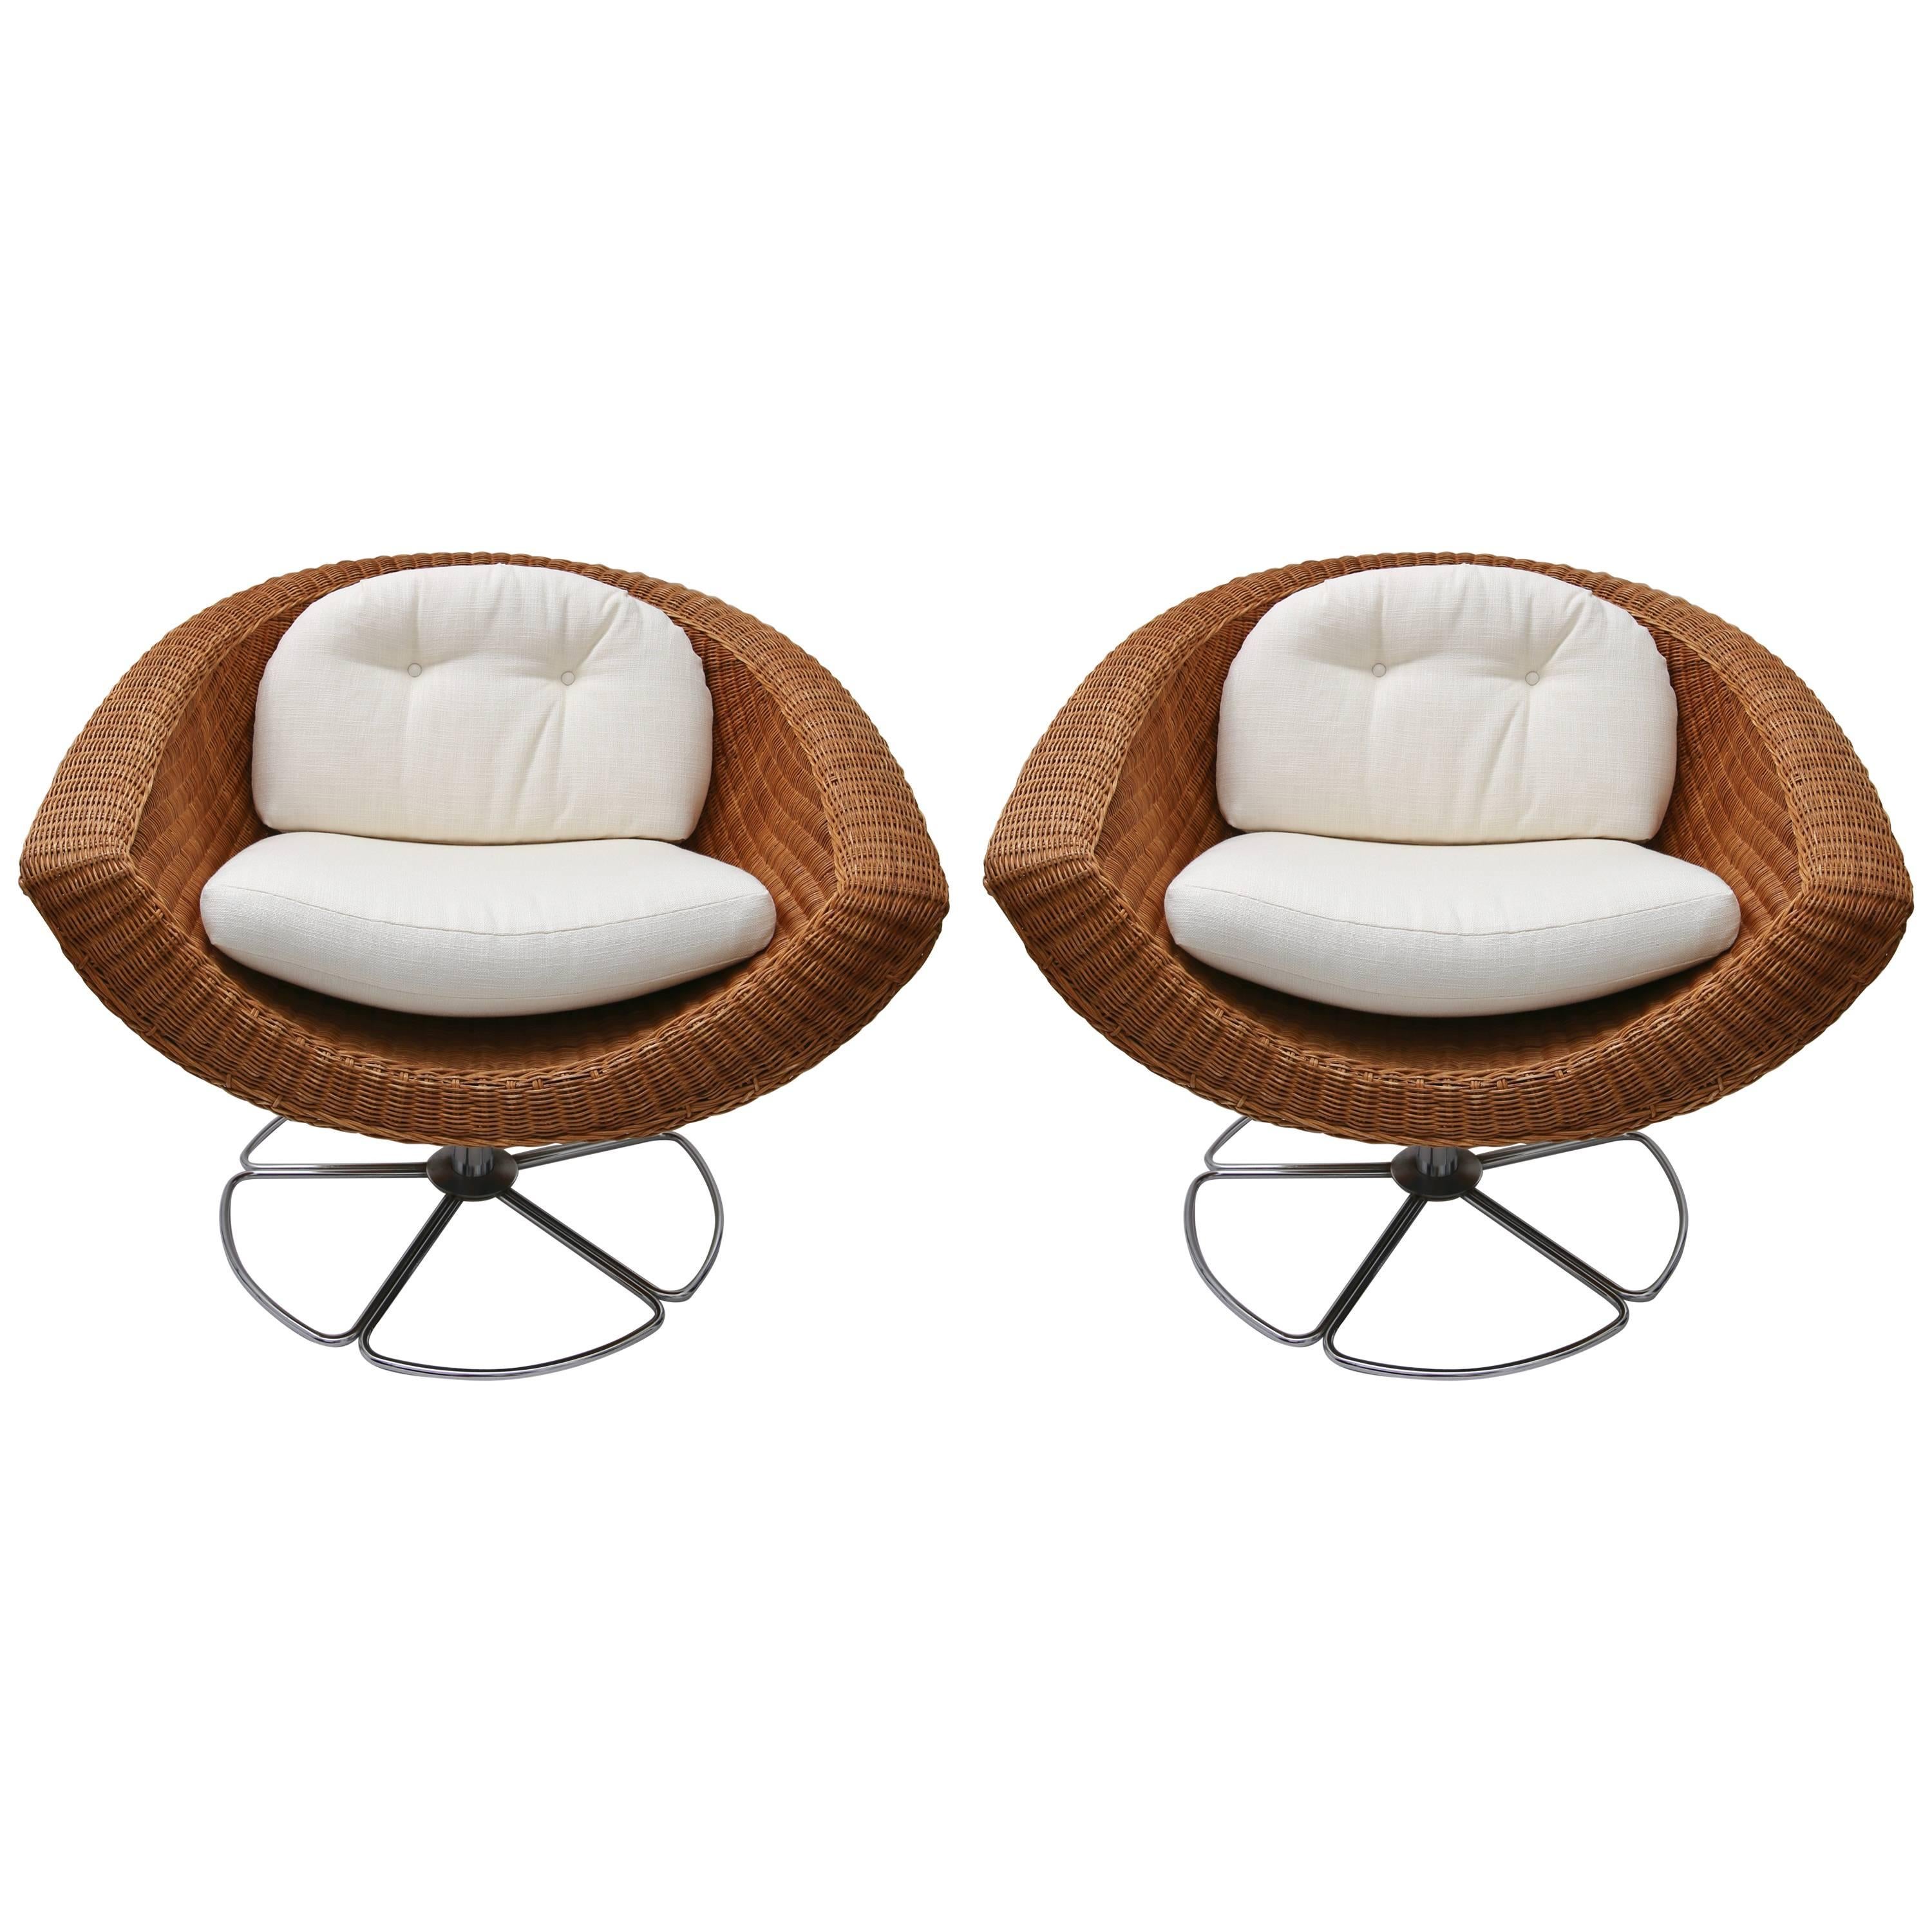 Pair of Bohemian Swivel Chairs in Woven Wicker and Polished Chrome